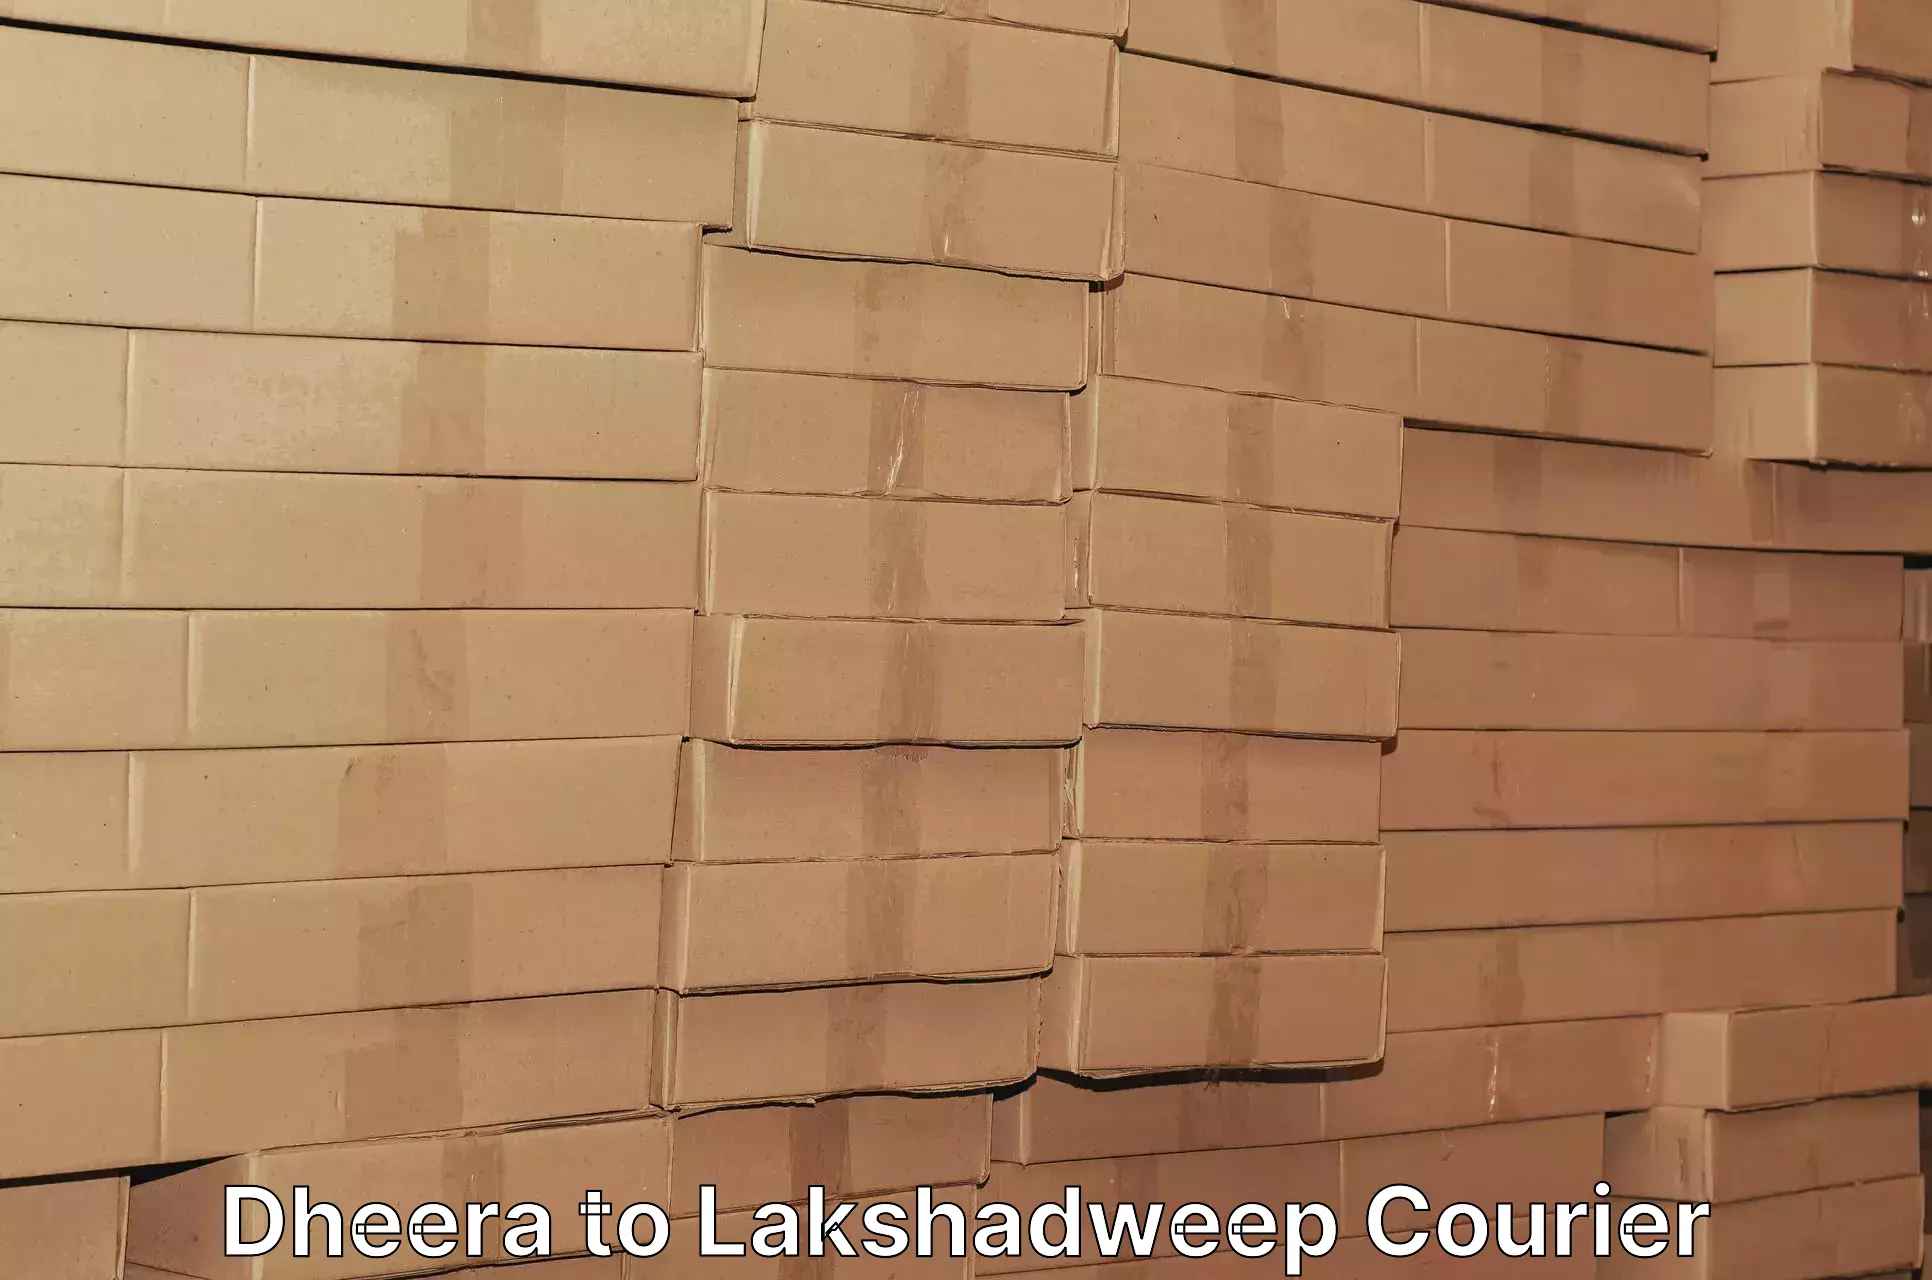 Nationwide courier service Dheera to Lakshadweep